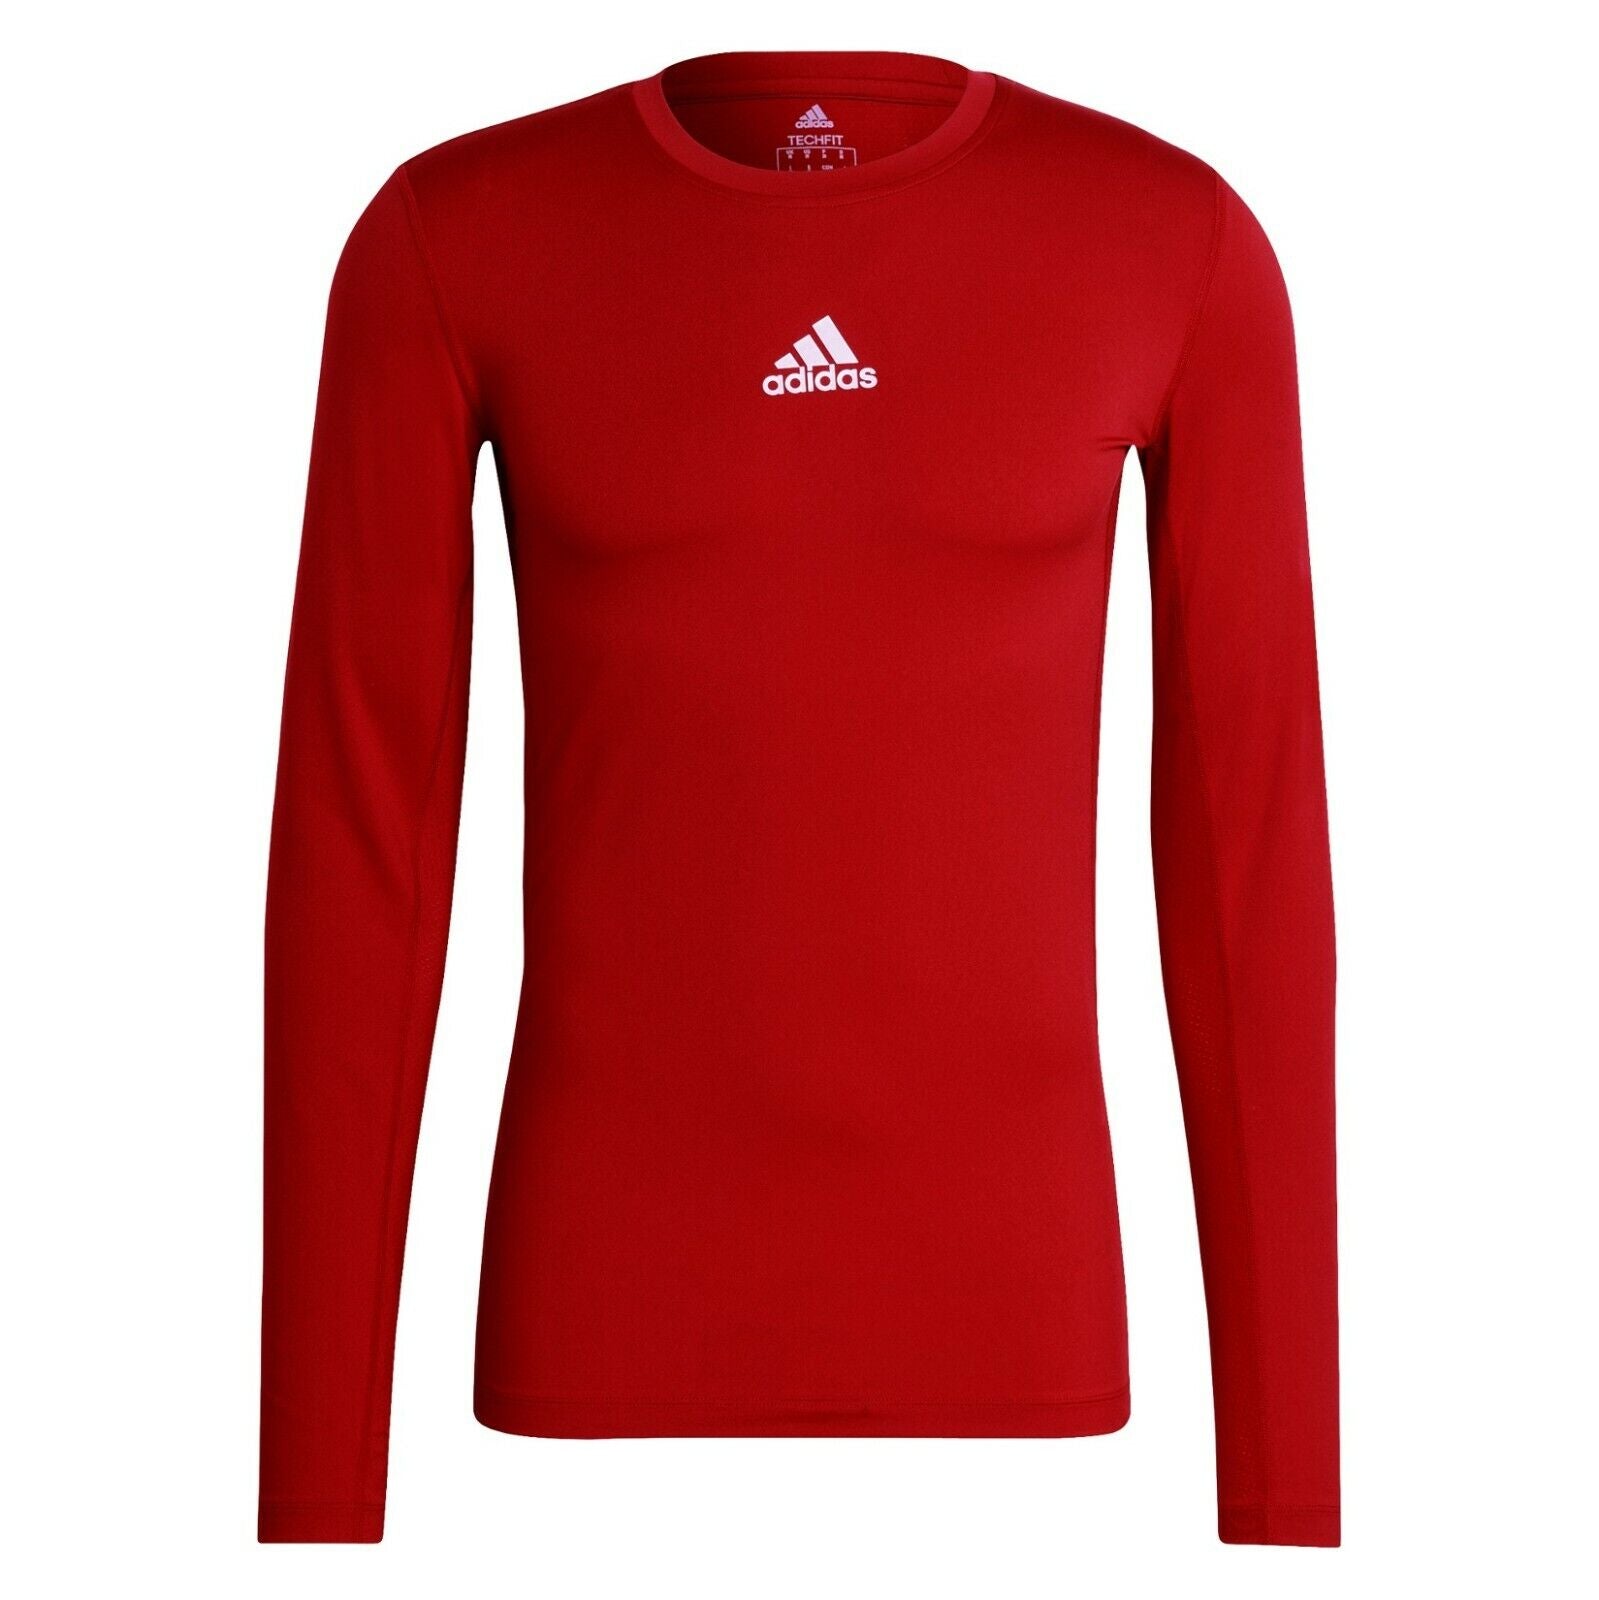 adidas Techfit Compression Top Men's Red New without Tags L - Locker Room  Direct